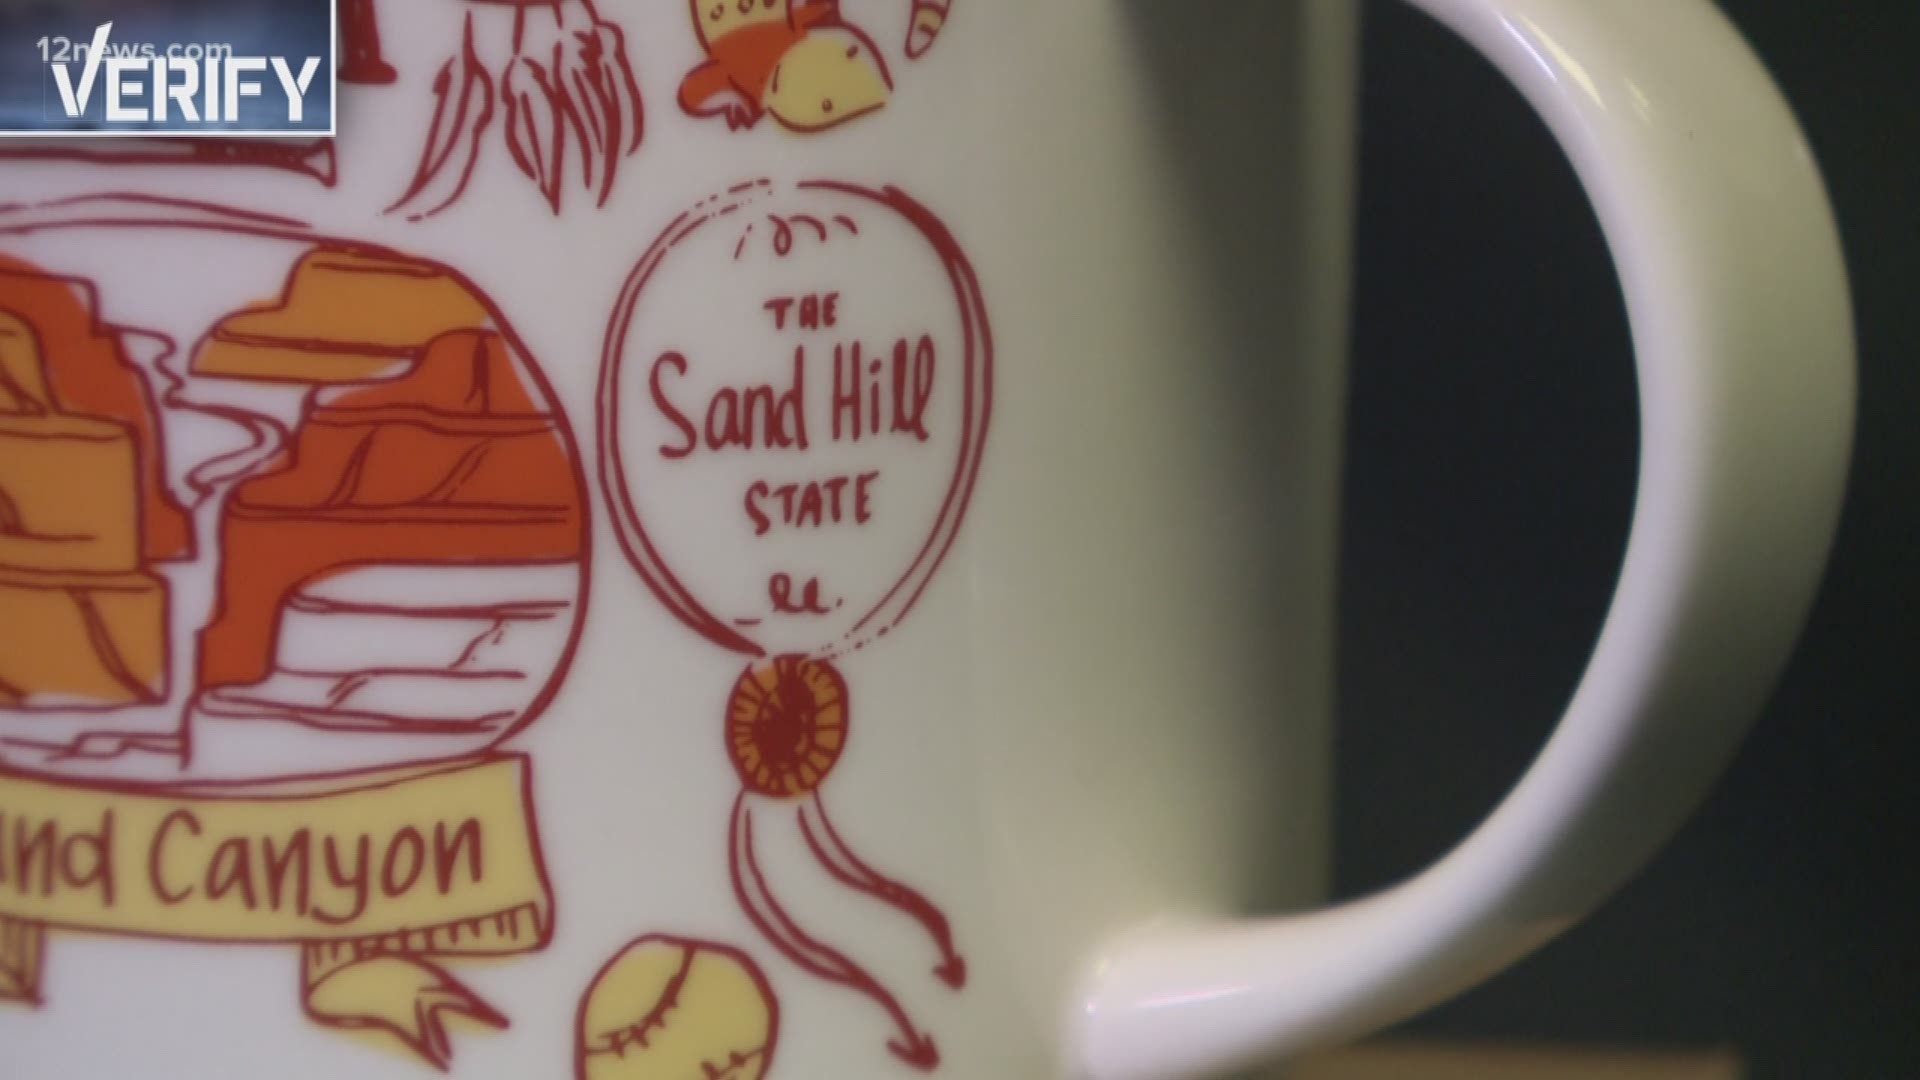 Apparently, the Grand Canyon State is also sometimes called, "the Sand Hill State," but why?